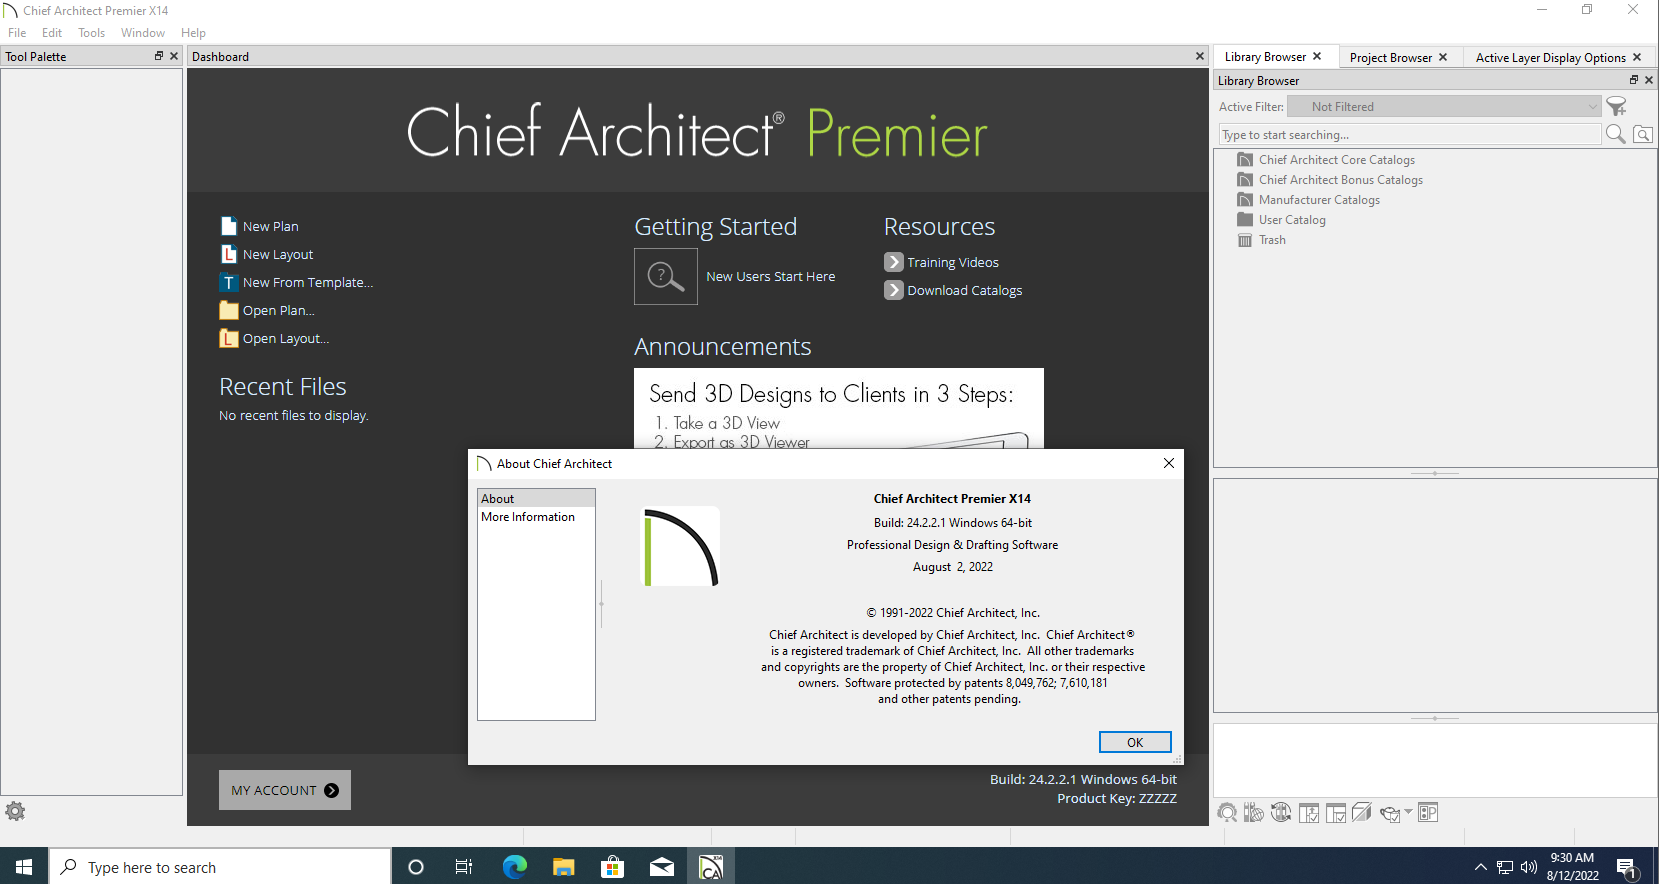 Working with Chief Architect Premier X14 24.2.2.1 full license